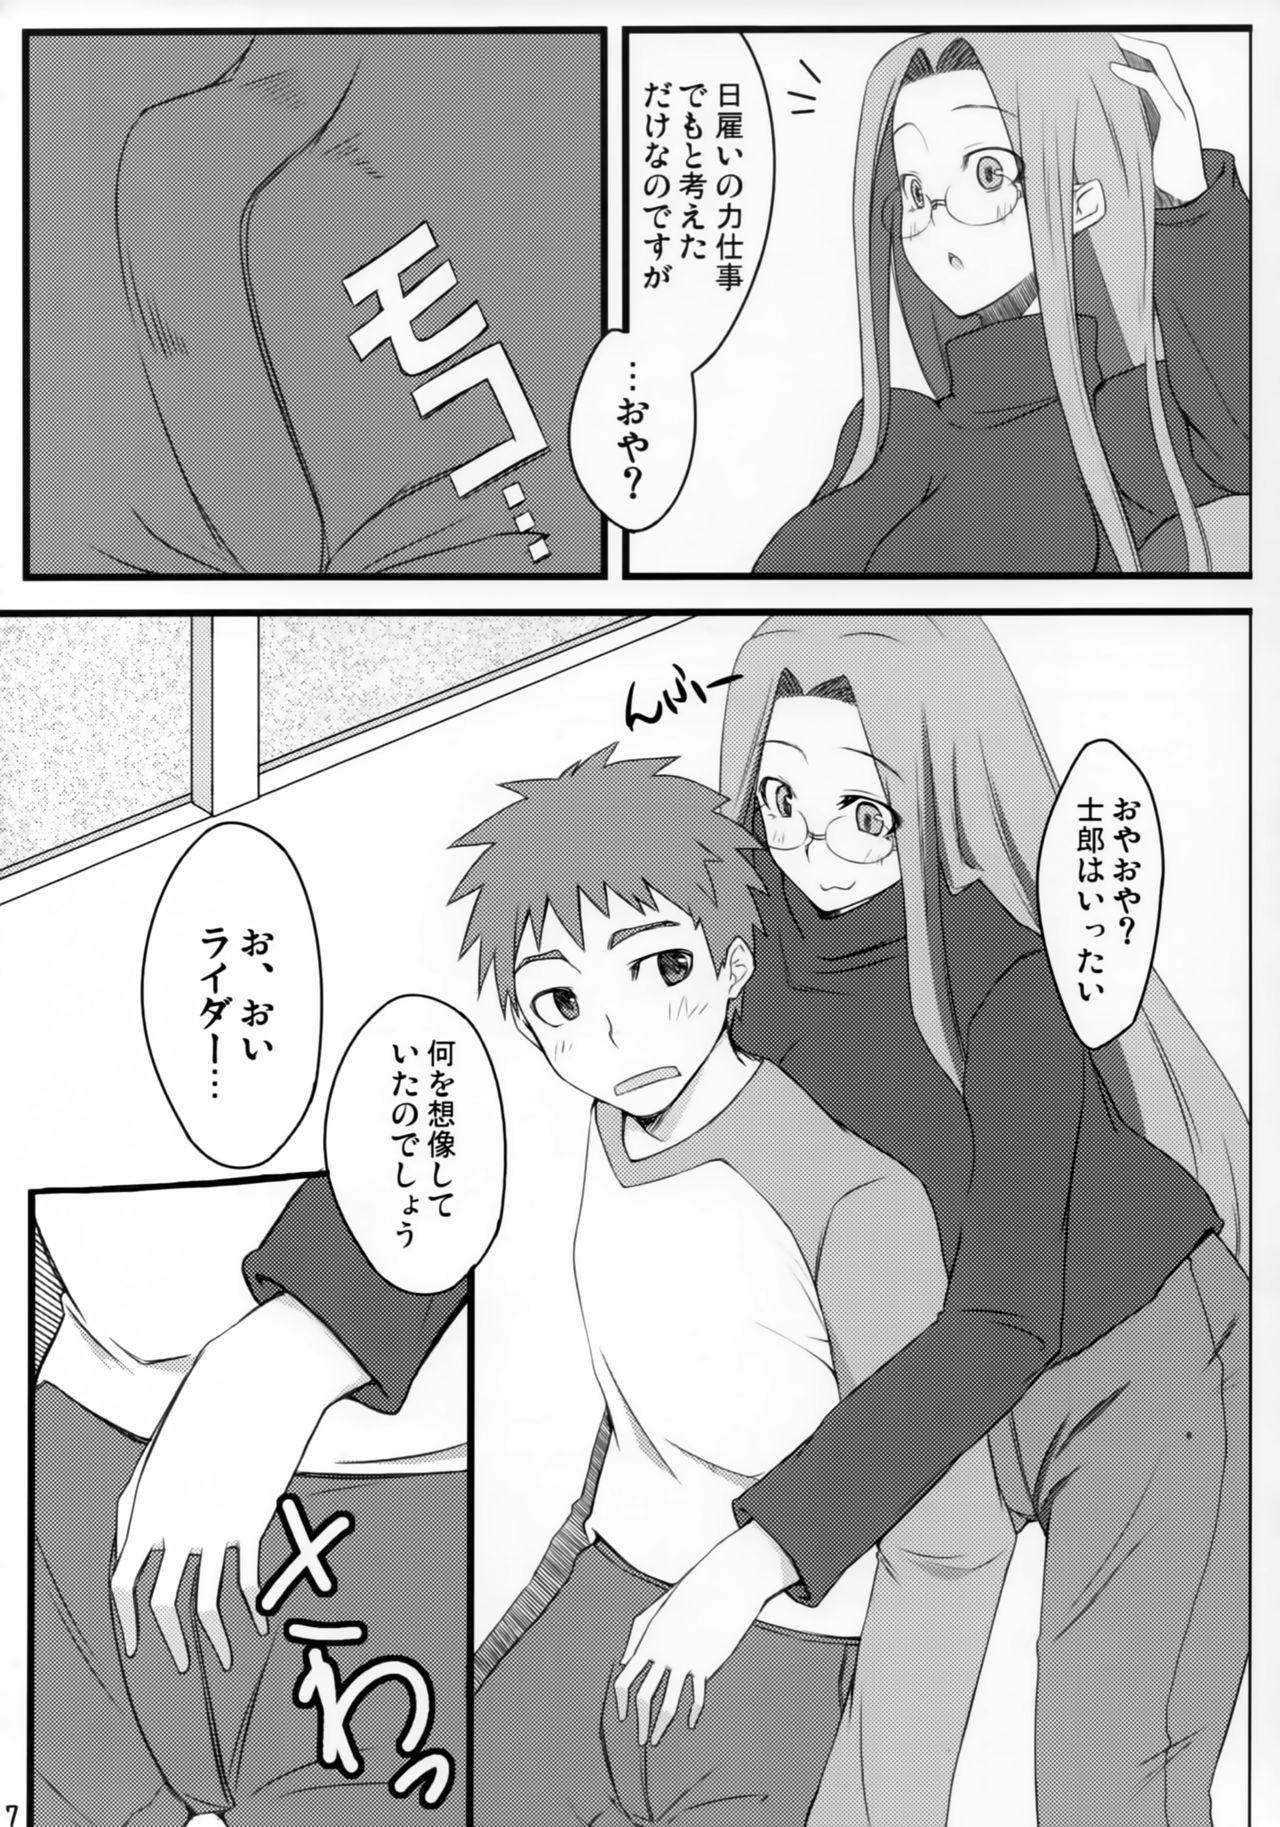 4some R4 - Fate stay night Boy - Page 6